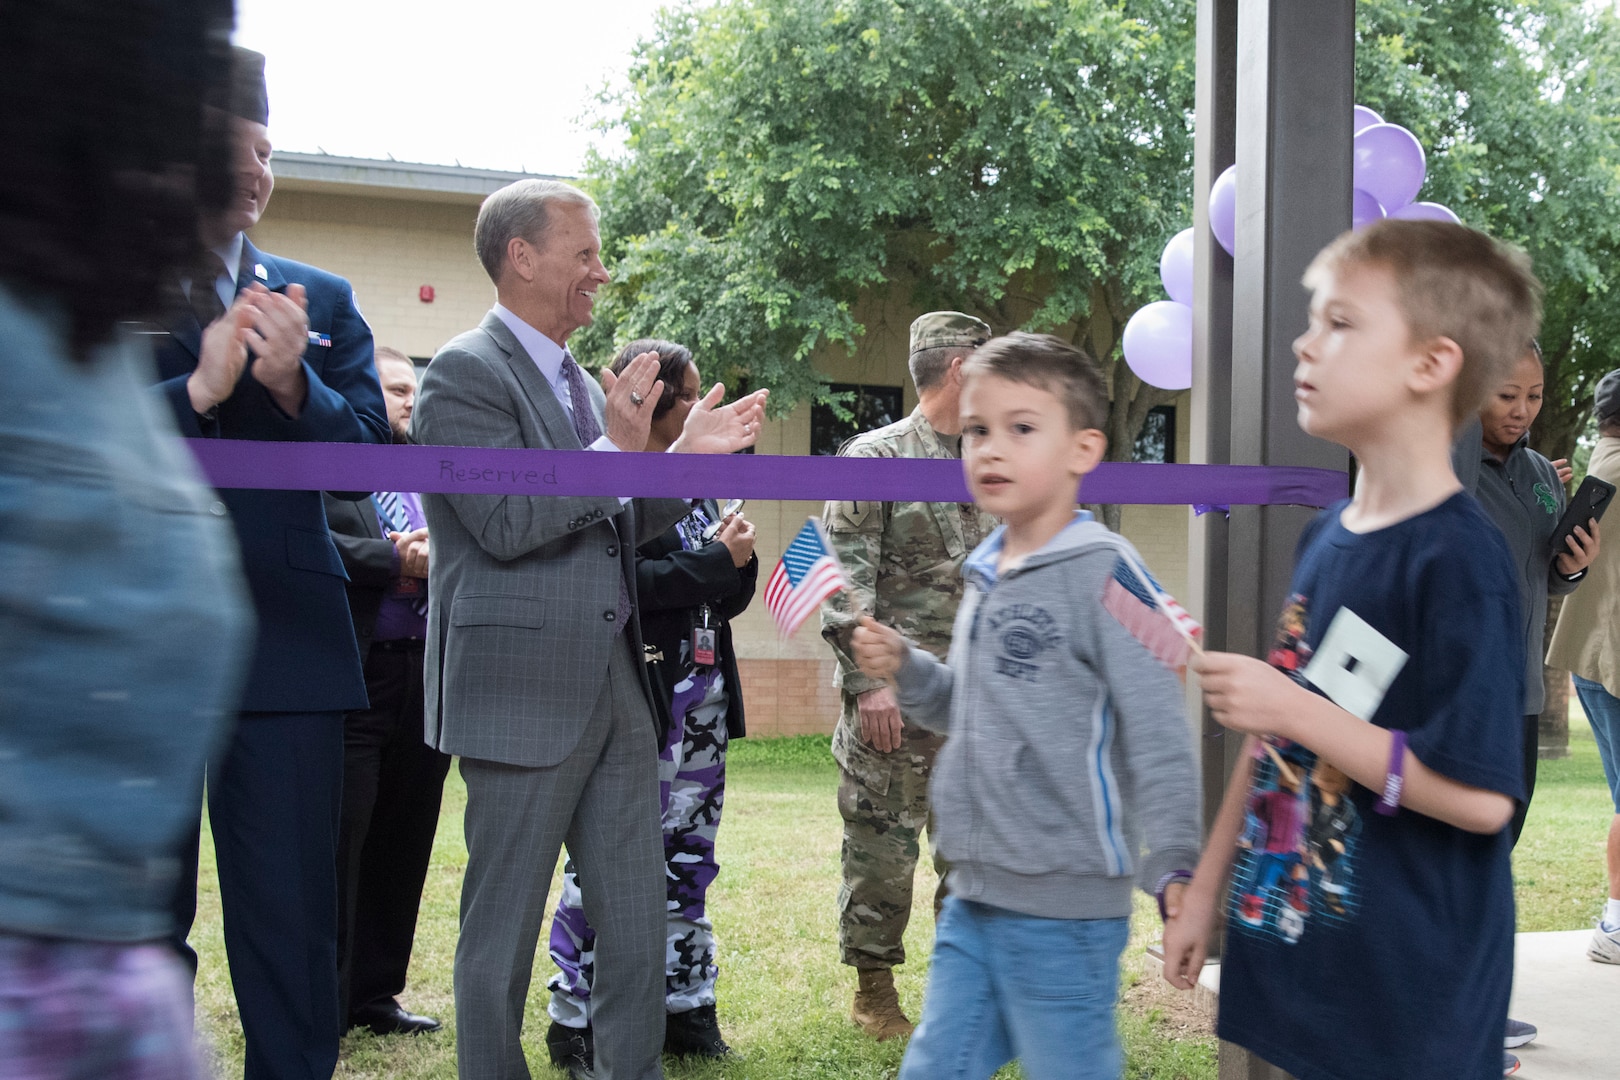 Frank Brogan, Department of Education assistant secretary for elementary and secondary education, cheers during the Lackland Independent School District’s PurpleUp! Parade April 12, 2019, in honor of the Month of the Military Child at Joint Base San Antonio-Lackland, Texas.